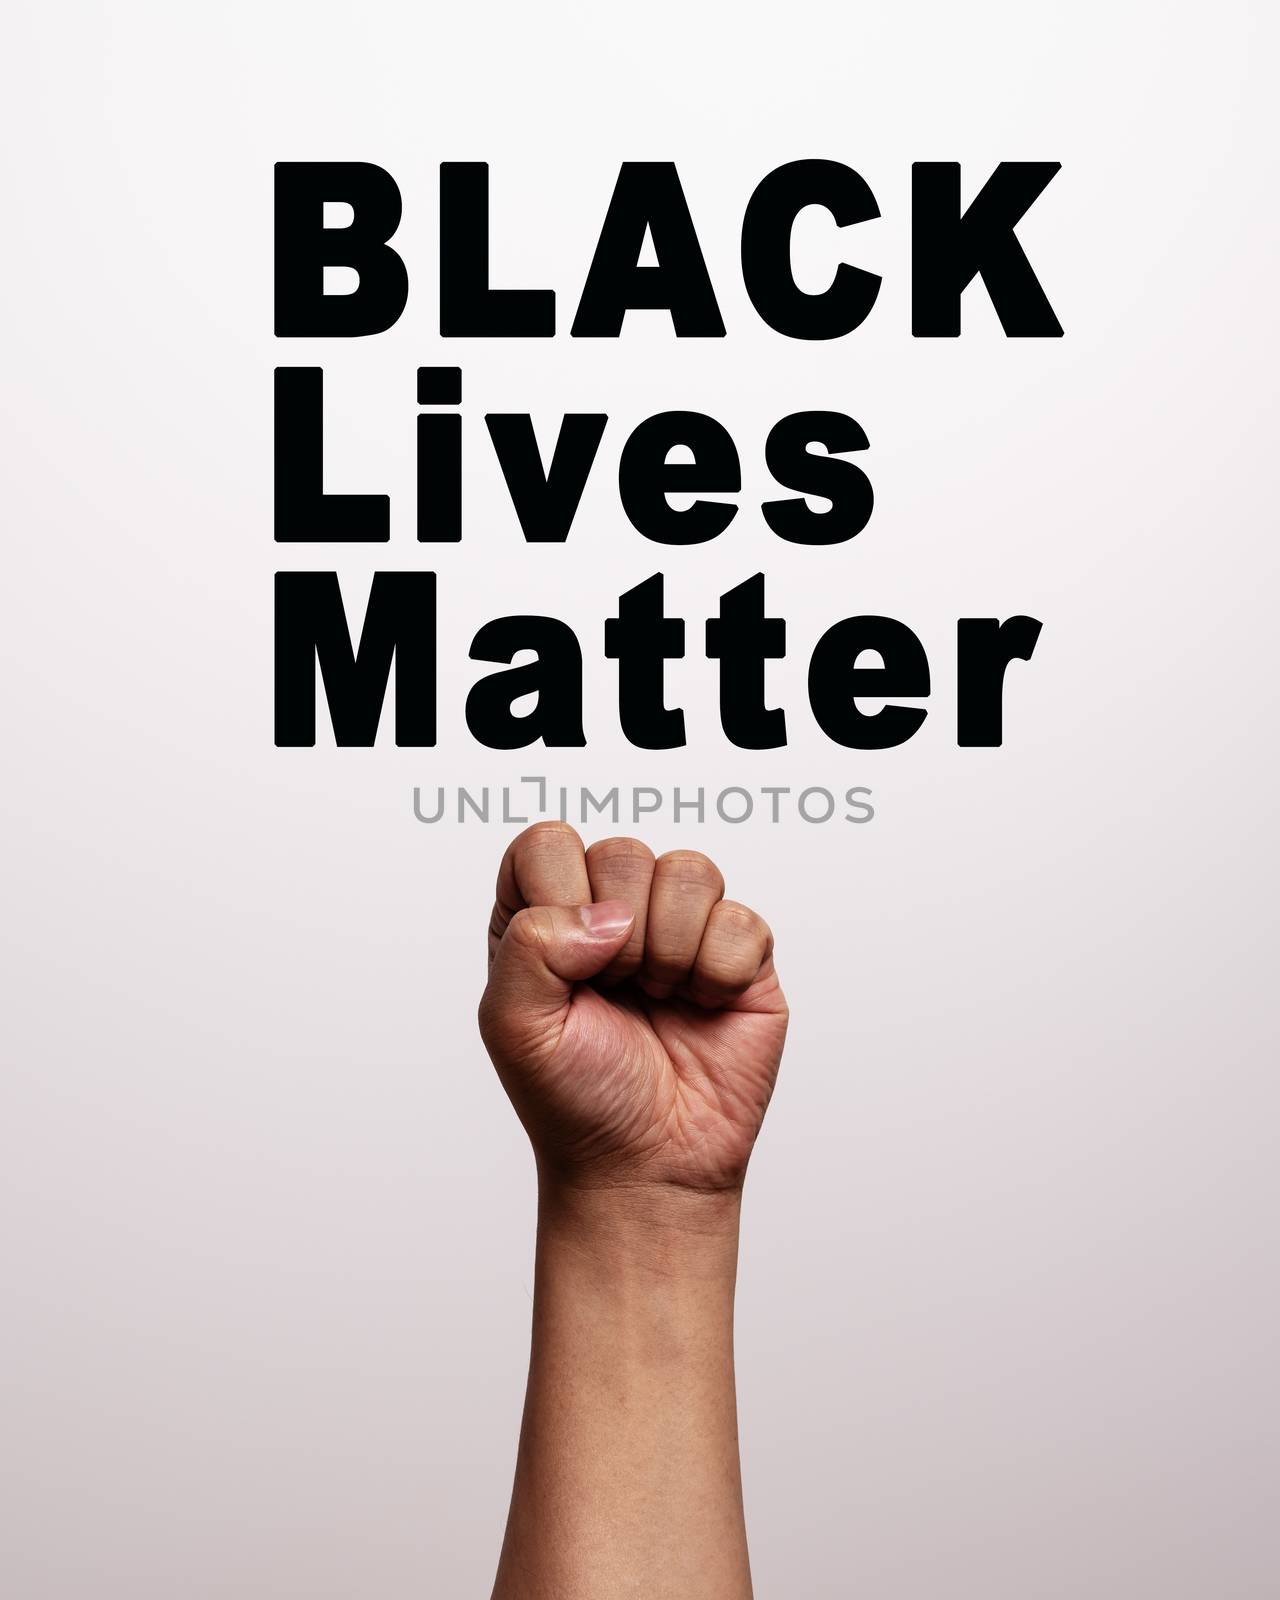 Black Lives Matter with Strong Fist as sign of Black Power